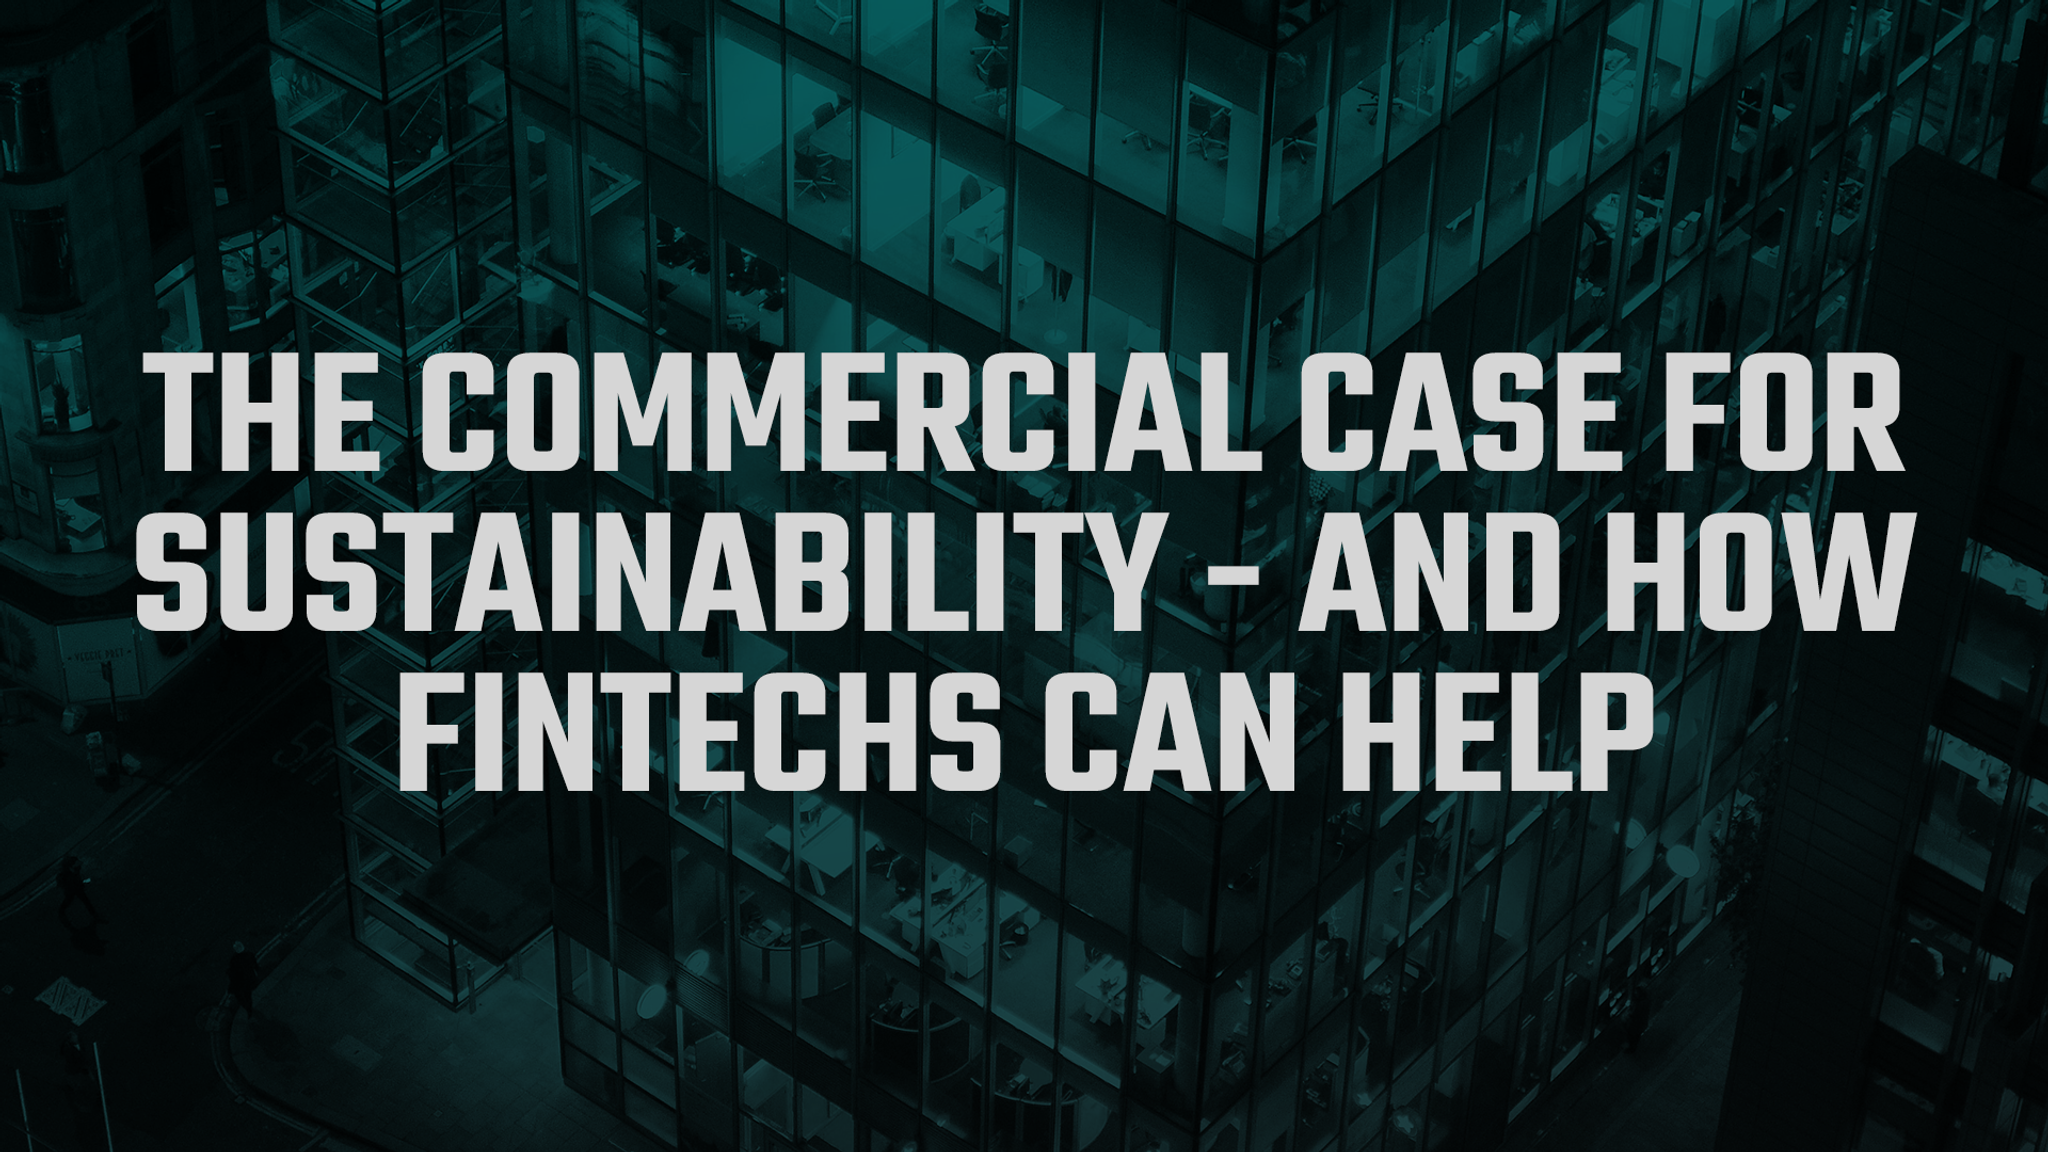 The commercial case for sustainability – and how fintechs can help